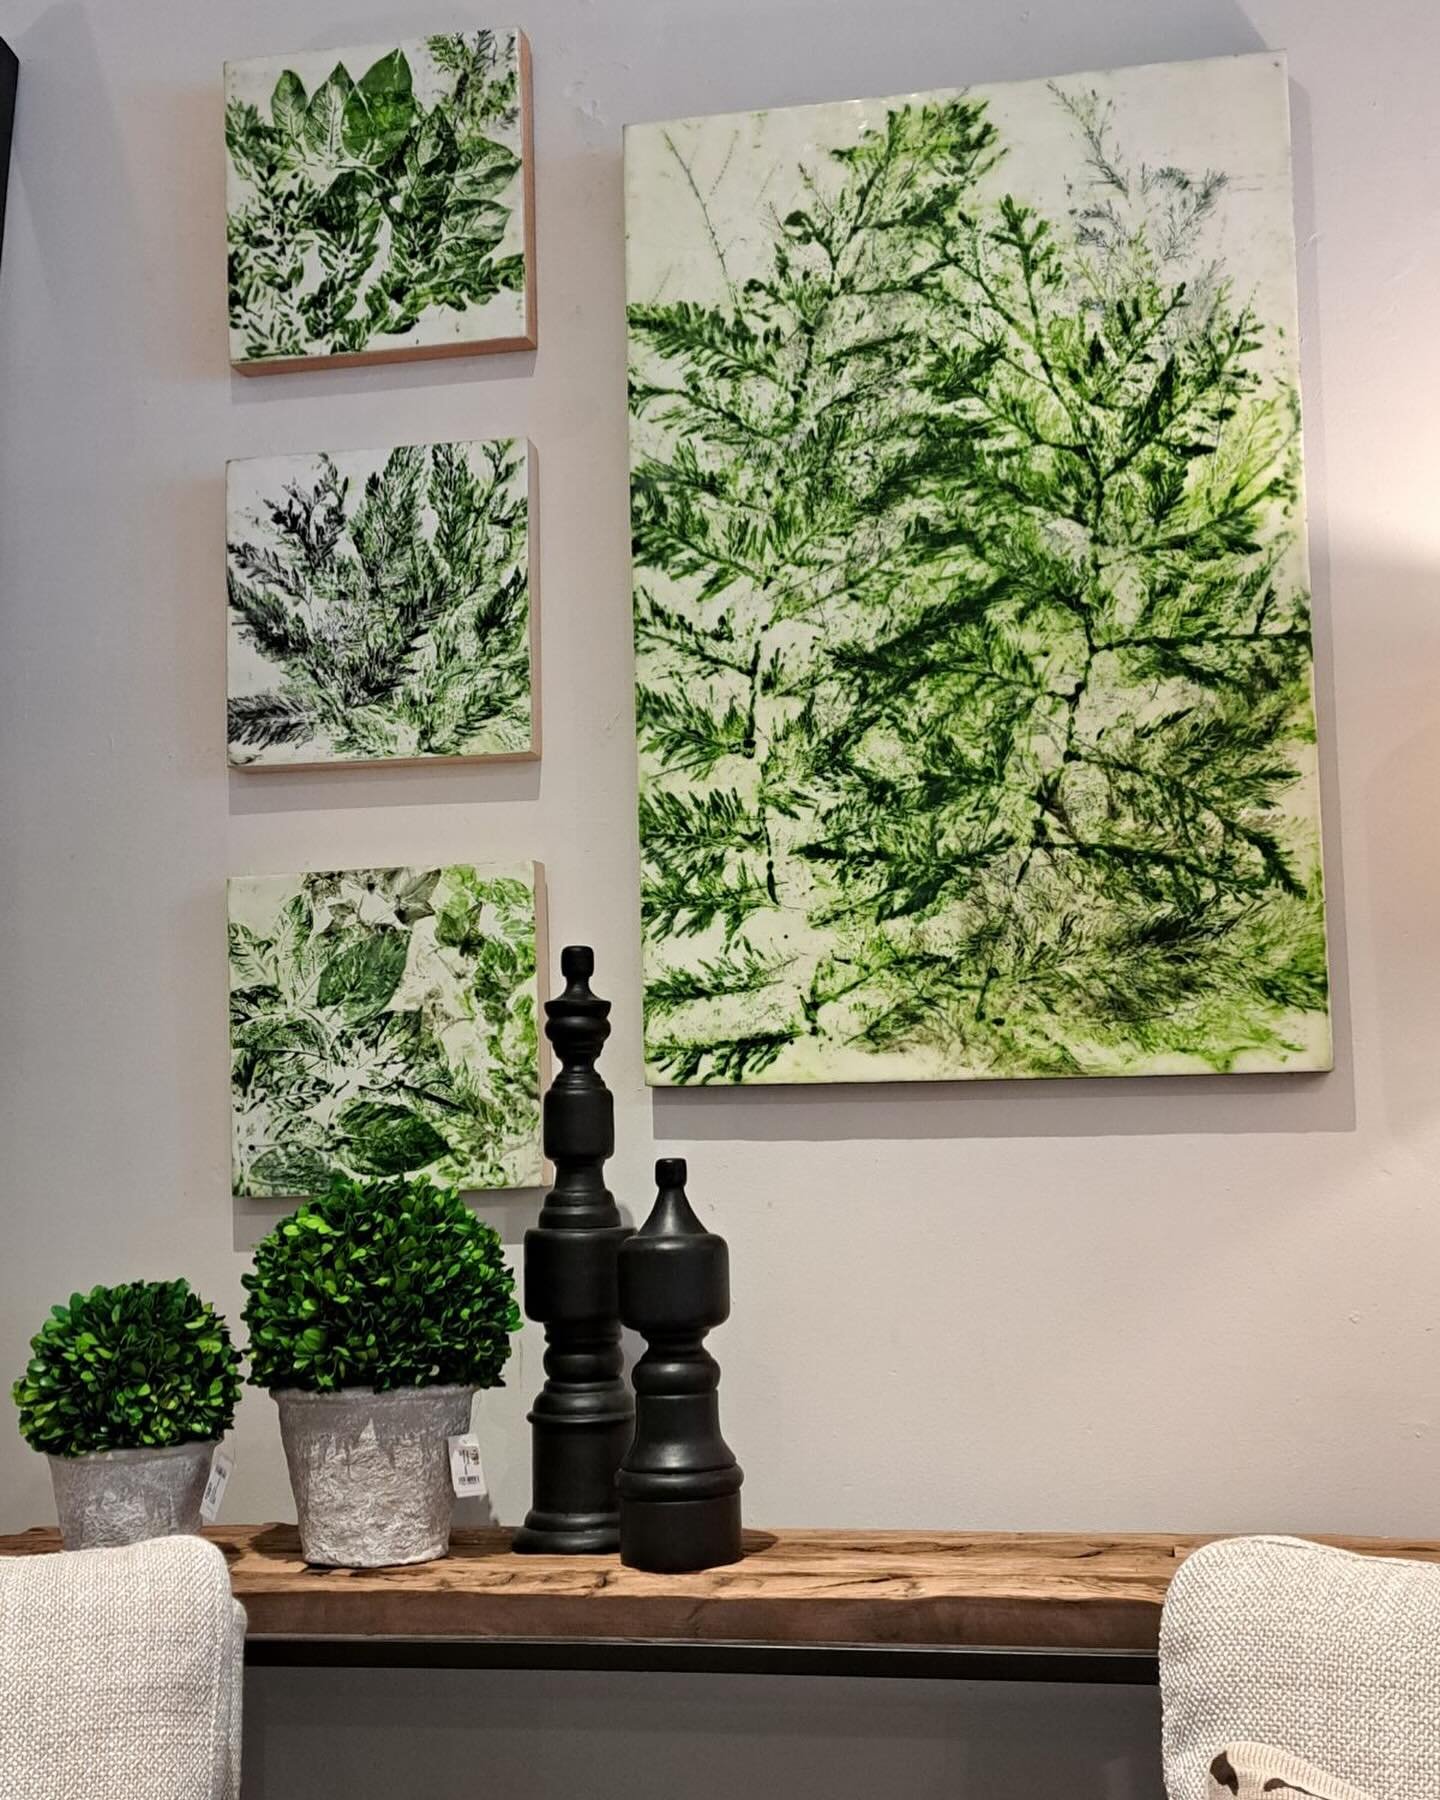 So excited to be back at Capers - my favorite home decor store - with this grouping of nature based encaustics.  If you are in West Seattle, it&rsquo;s definitely worth a stop! 

#westseattle #caperswestseattle #encausticpainting #encaustic #favorite